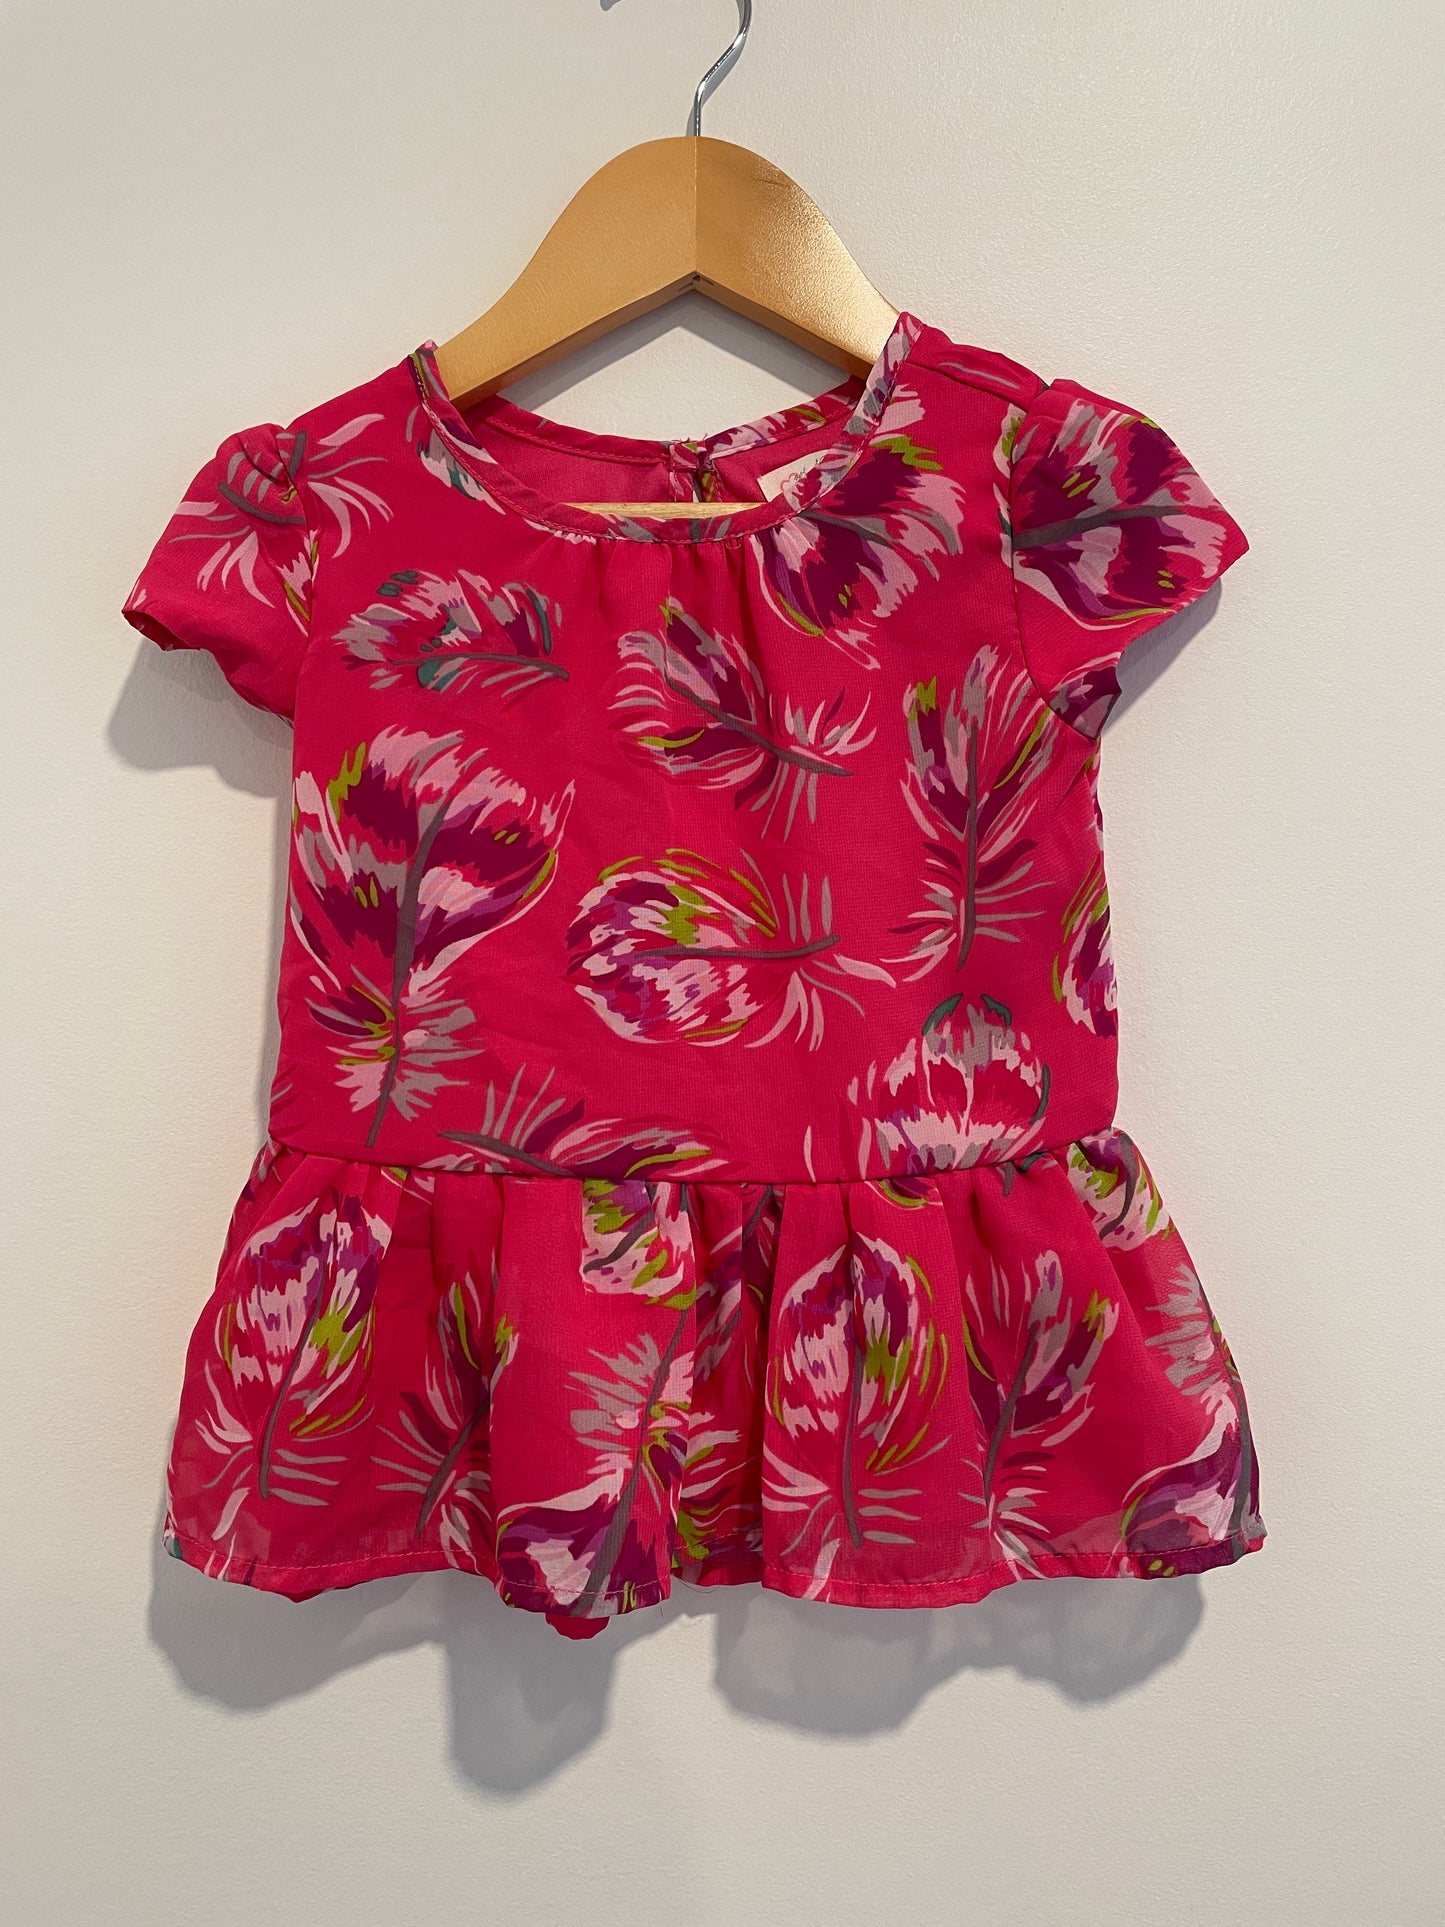 New Pink Feather Ruffle Top / 3 years